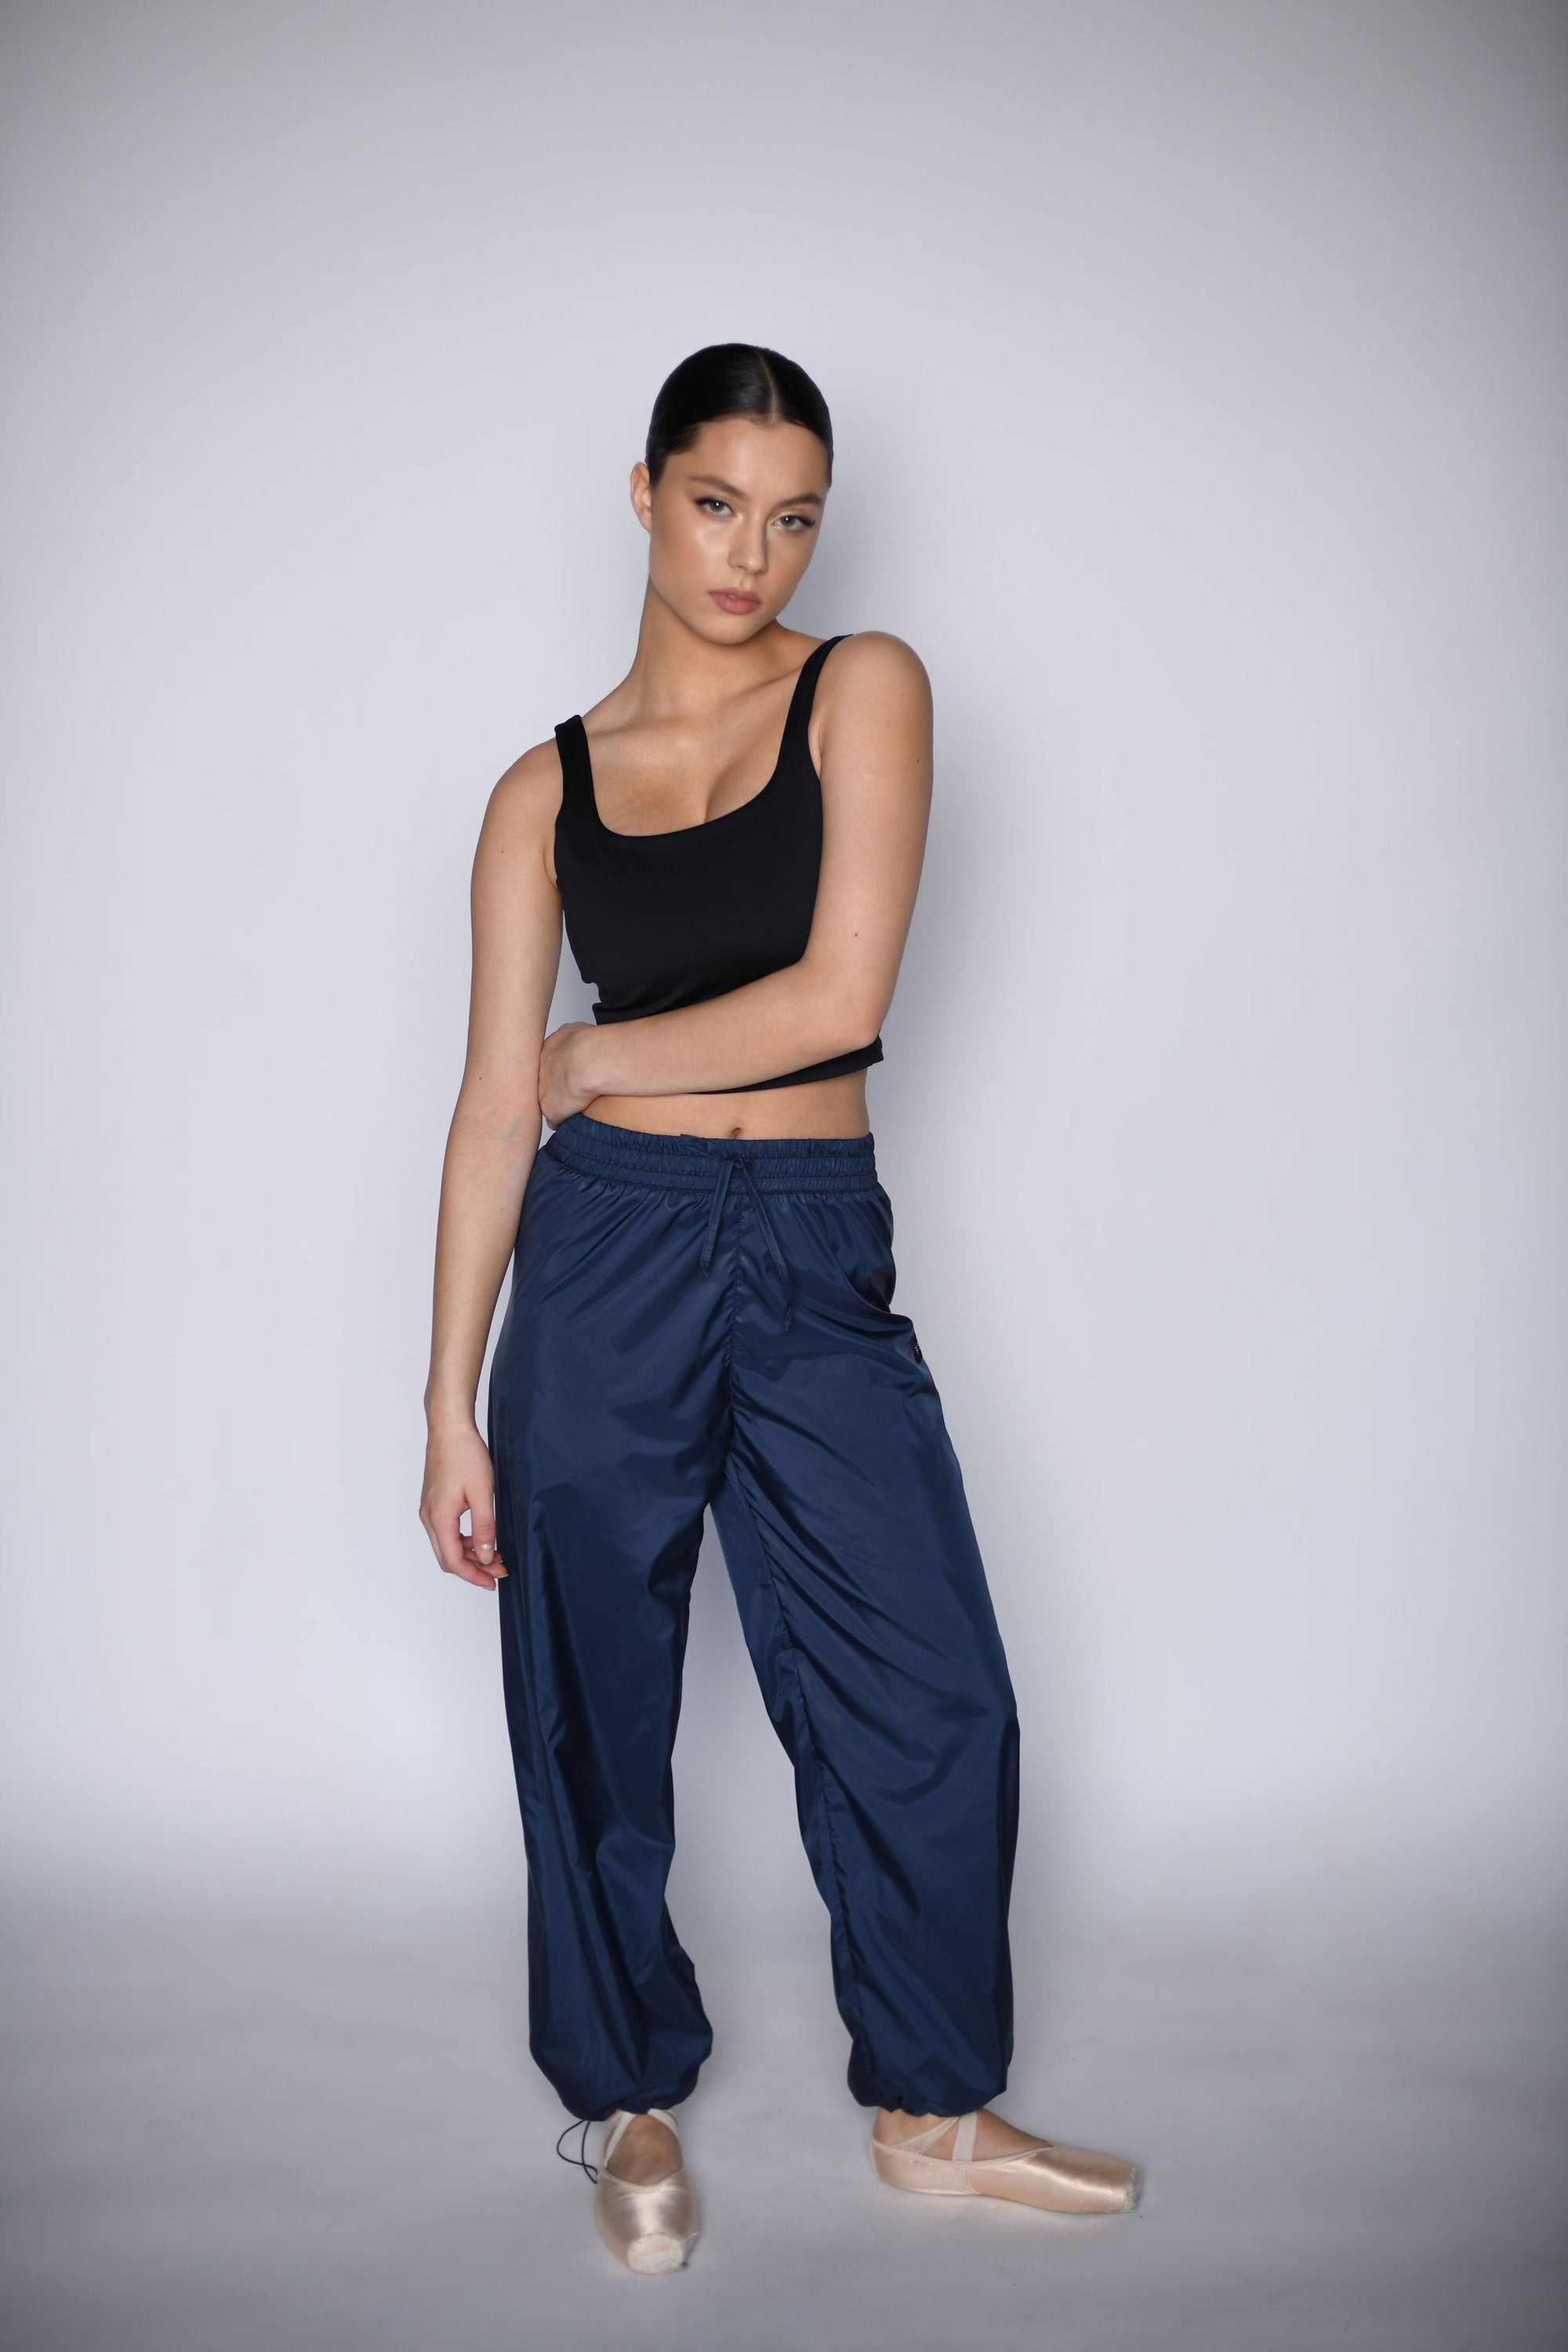 NEW URBAN SWAN COLLECTION S/S 23 | Royal blue pants